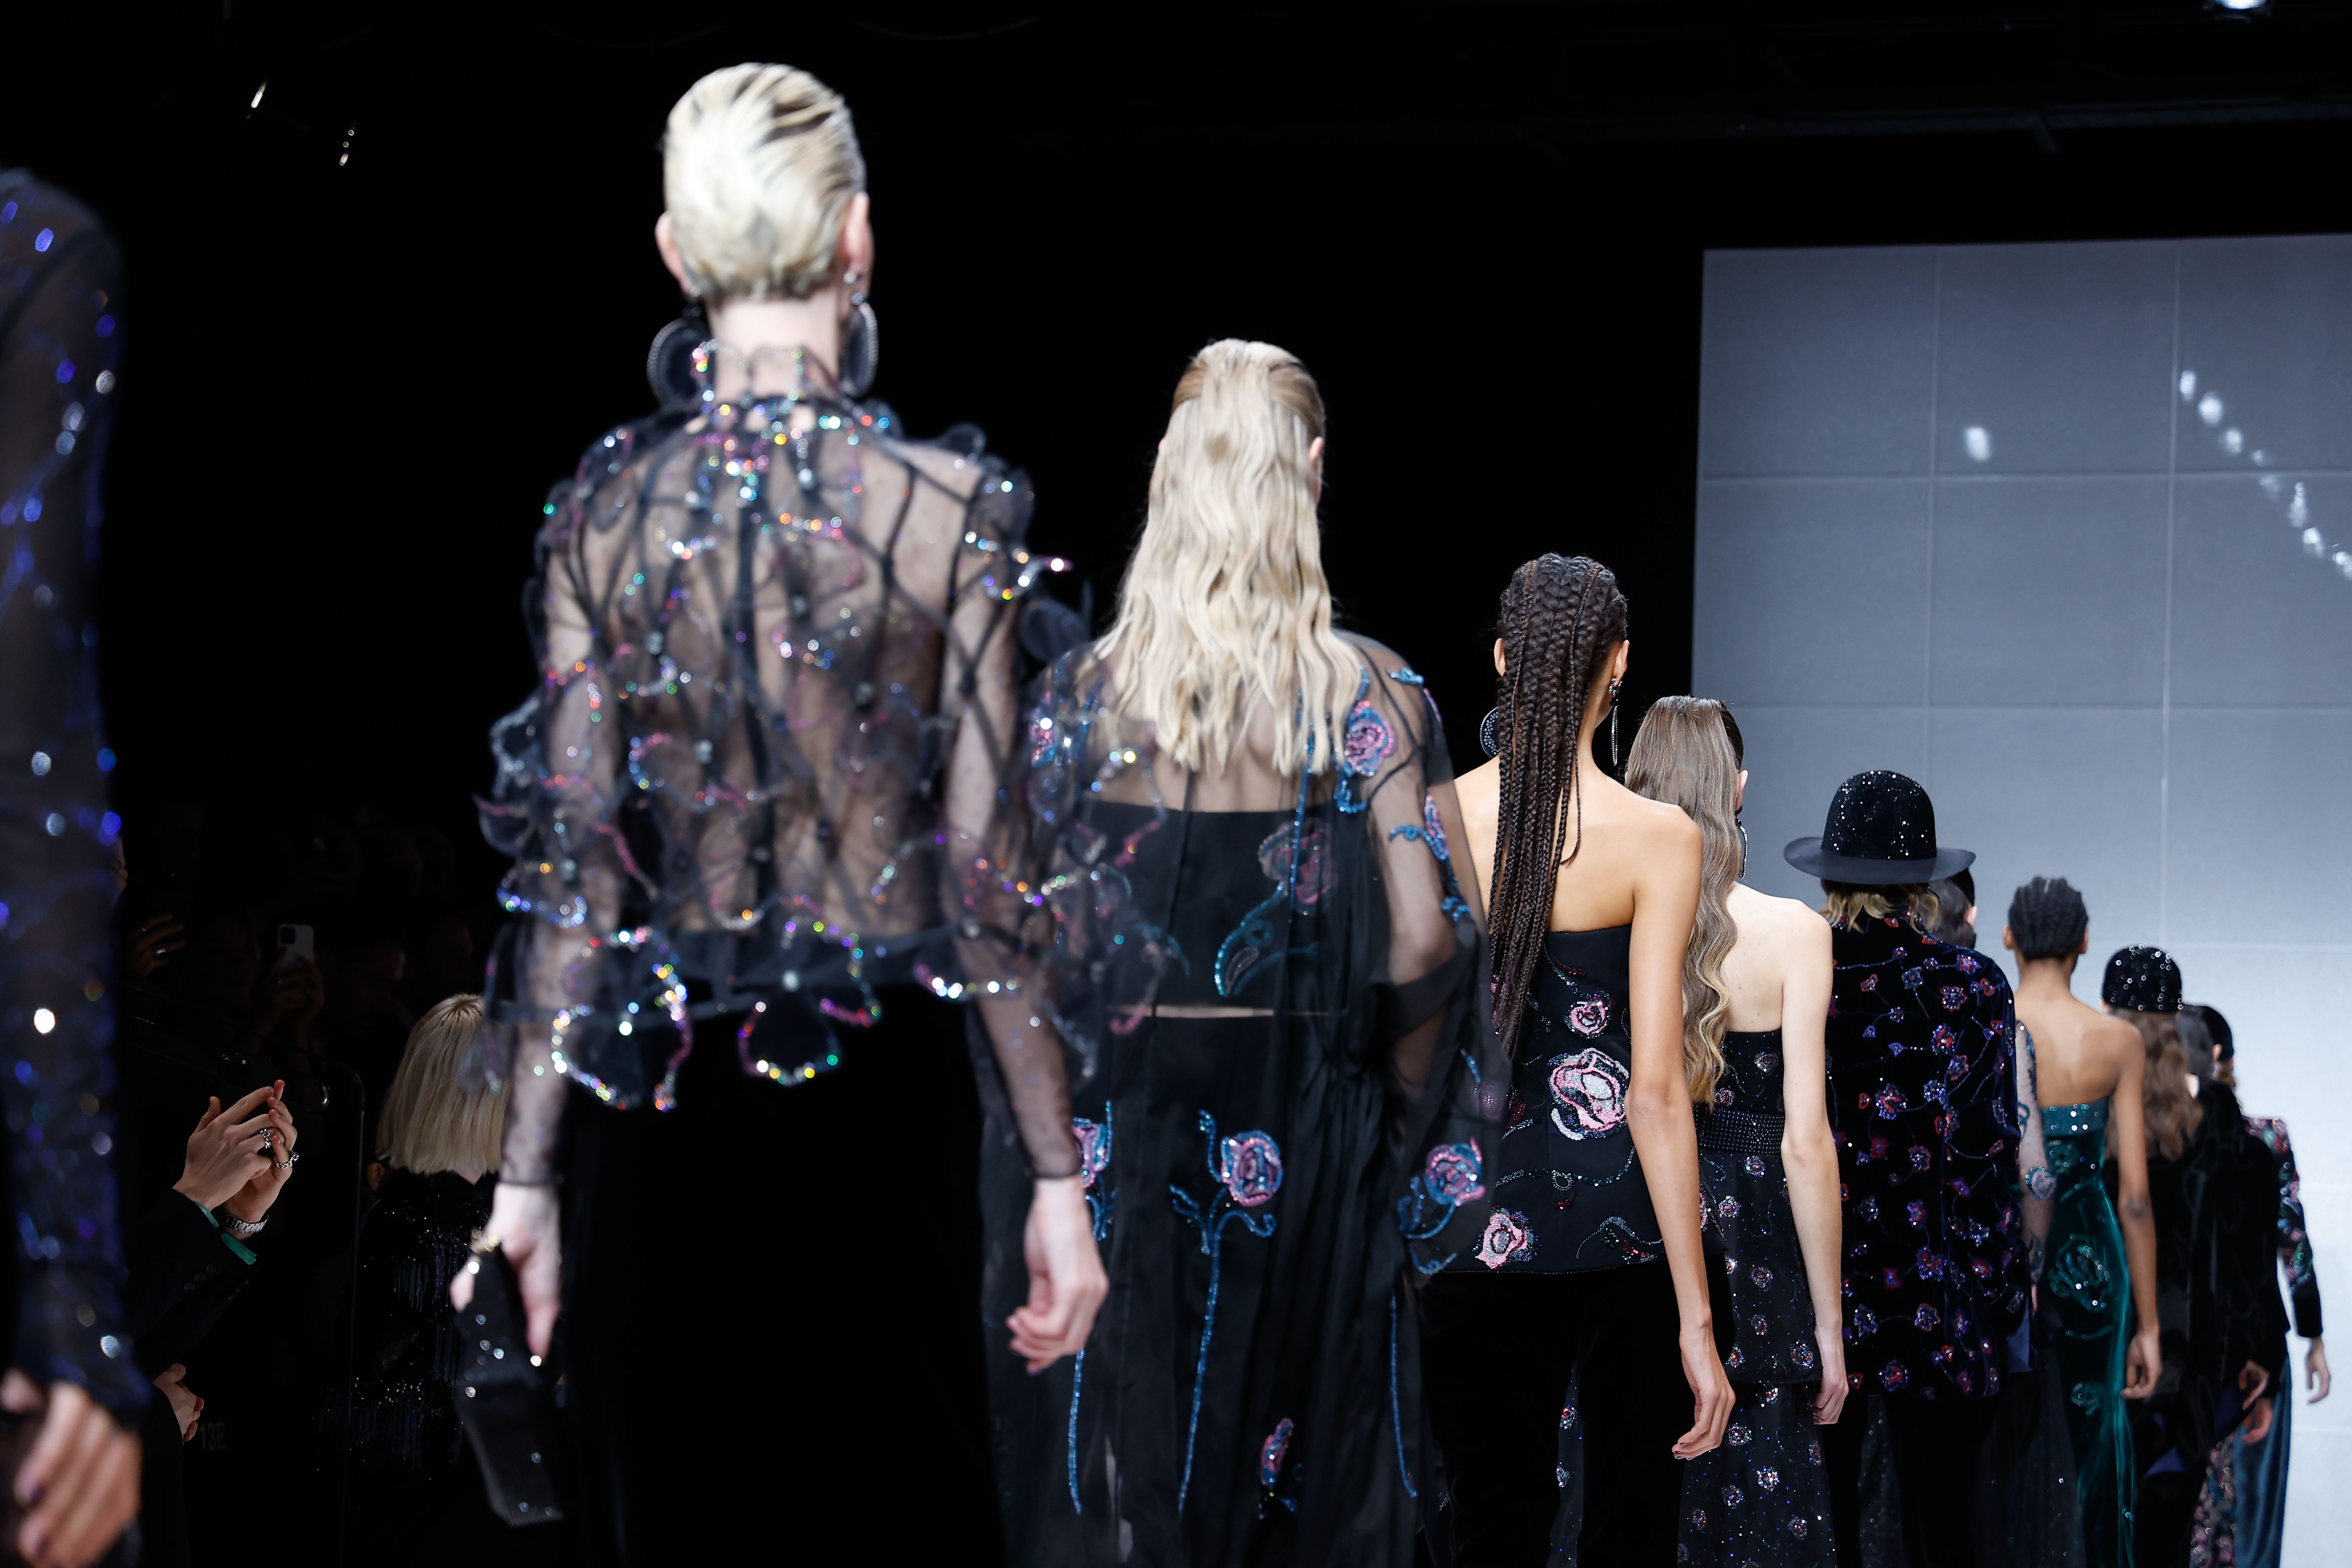 Dark shades with delicate bejewelled embellishments on the runway at Giorgio Armani.